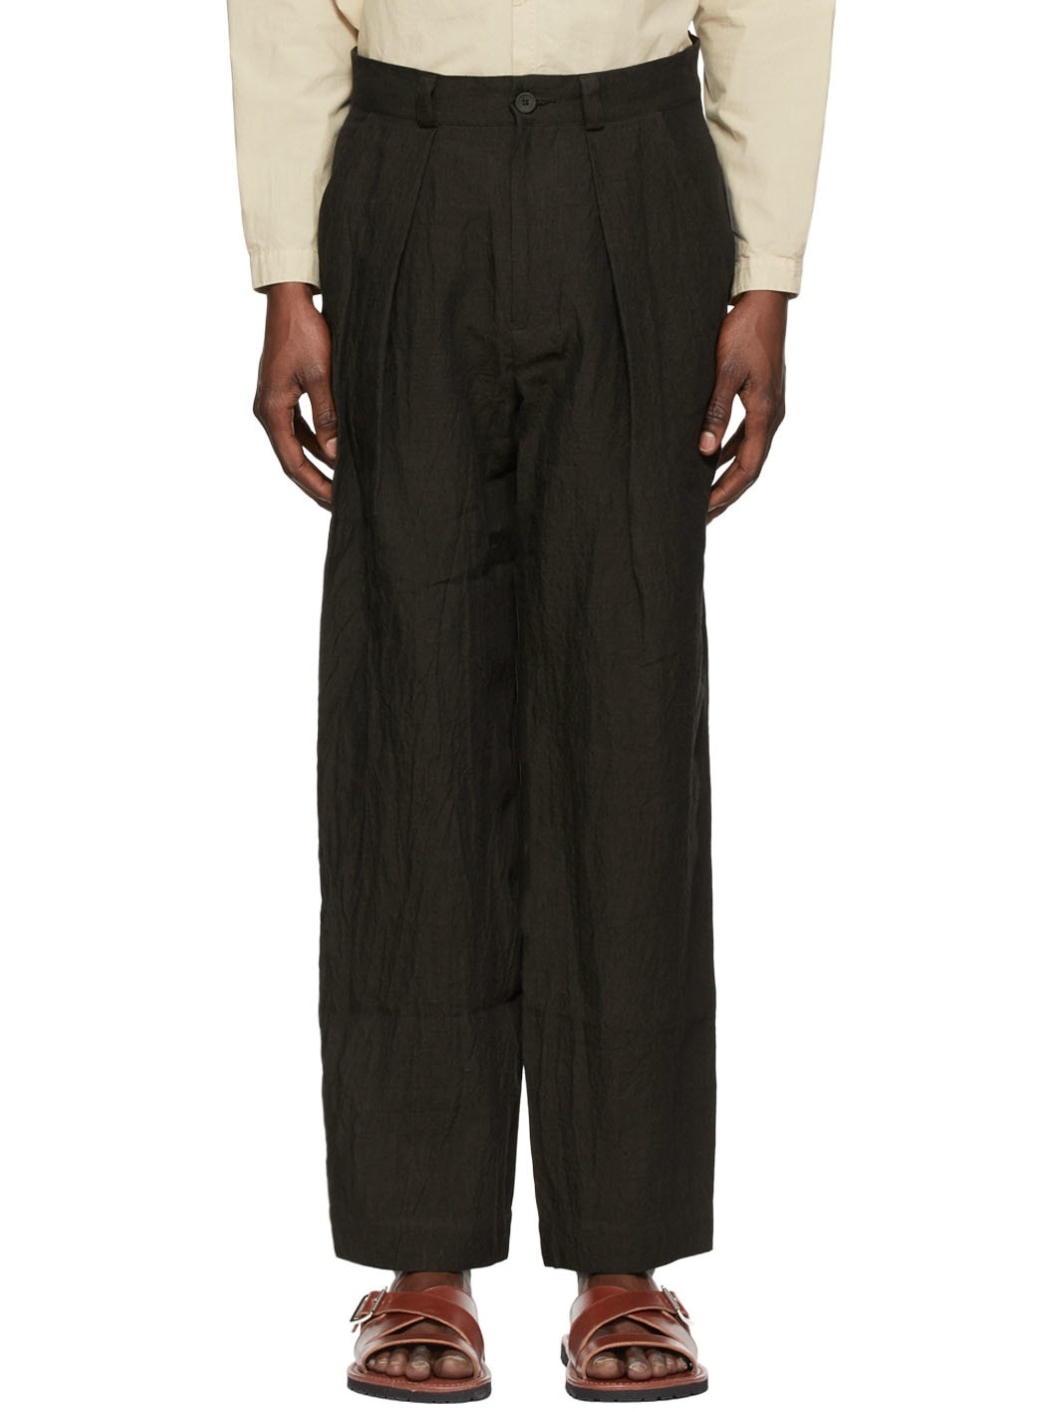 Green 'The Botanist' Trousers - 1